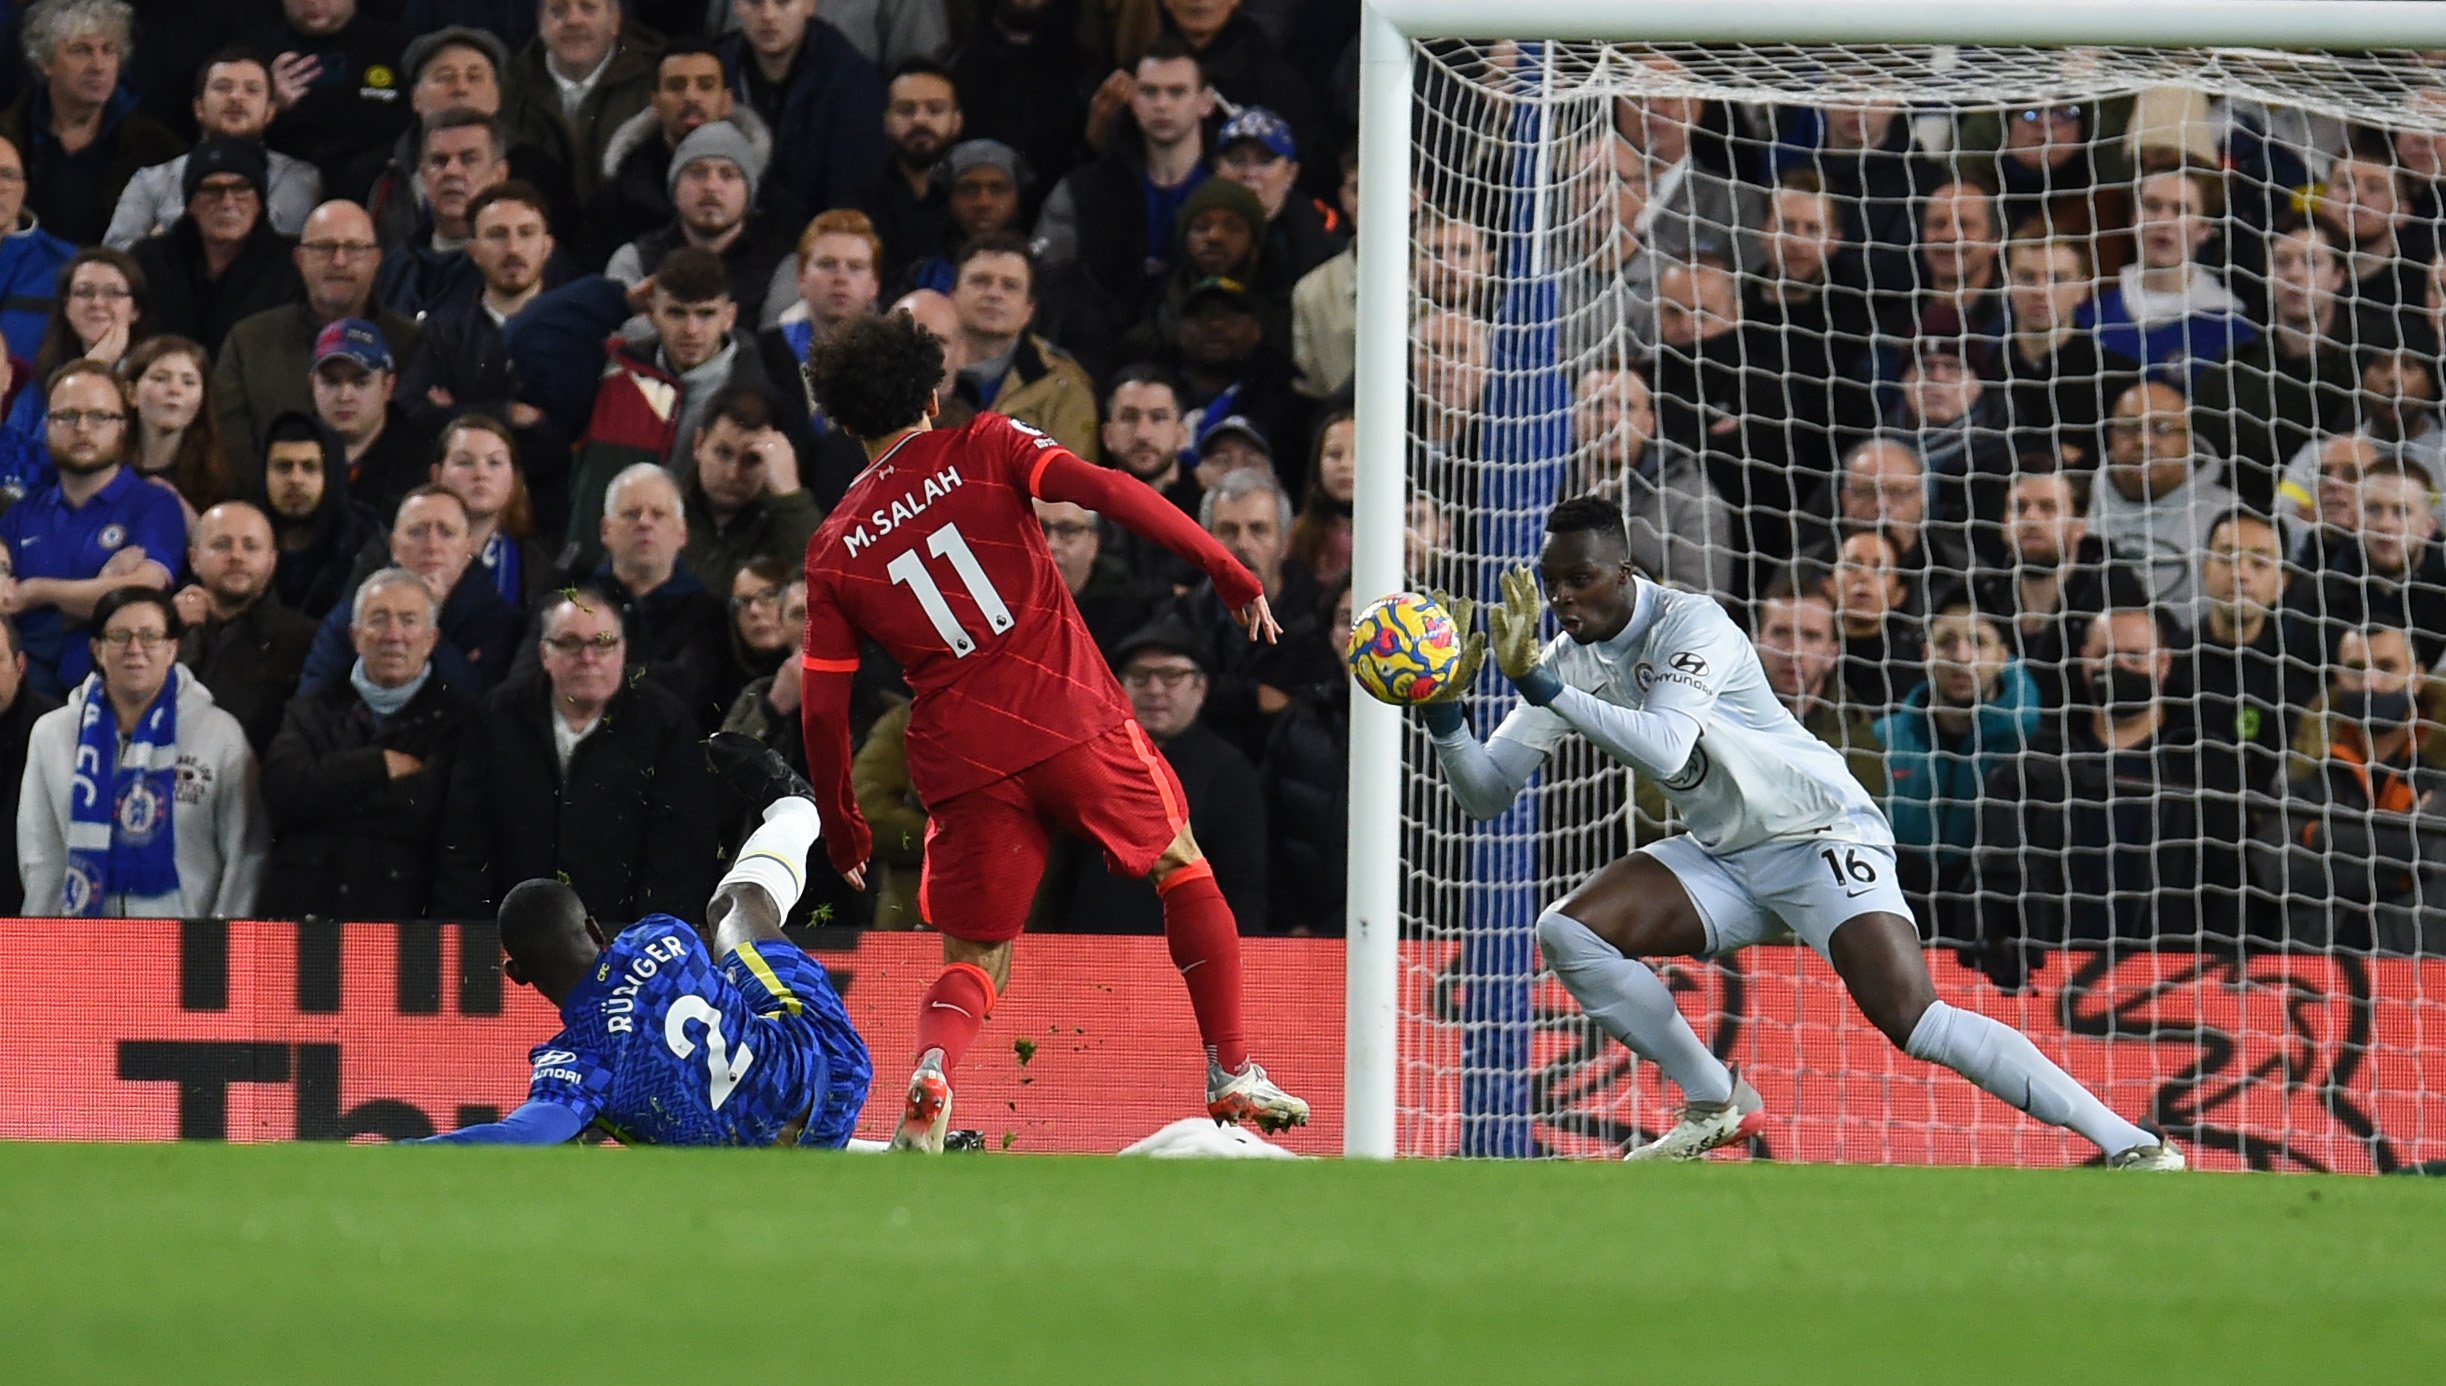 Joe Cole confident Chelsea can stop Liverpool's Salah thanks to Rudiger